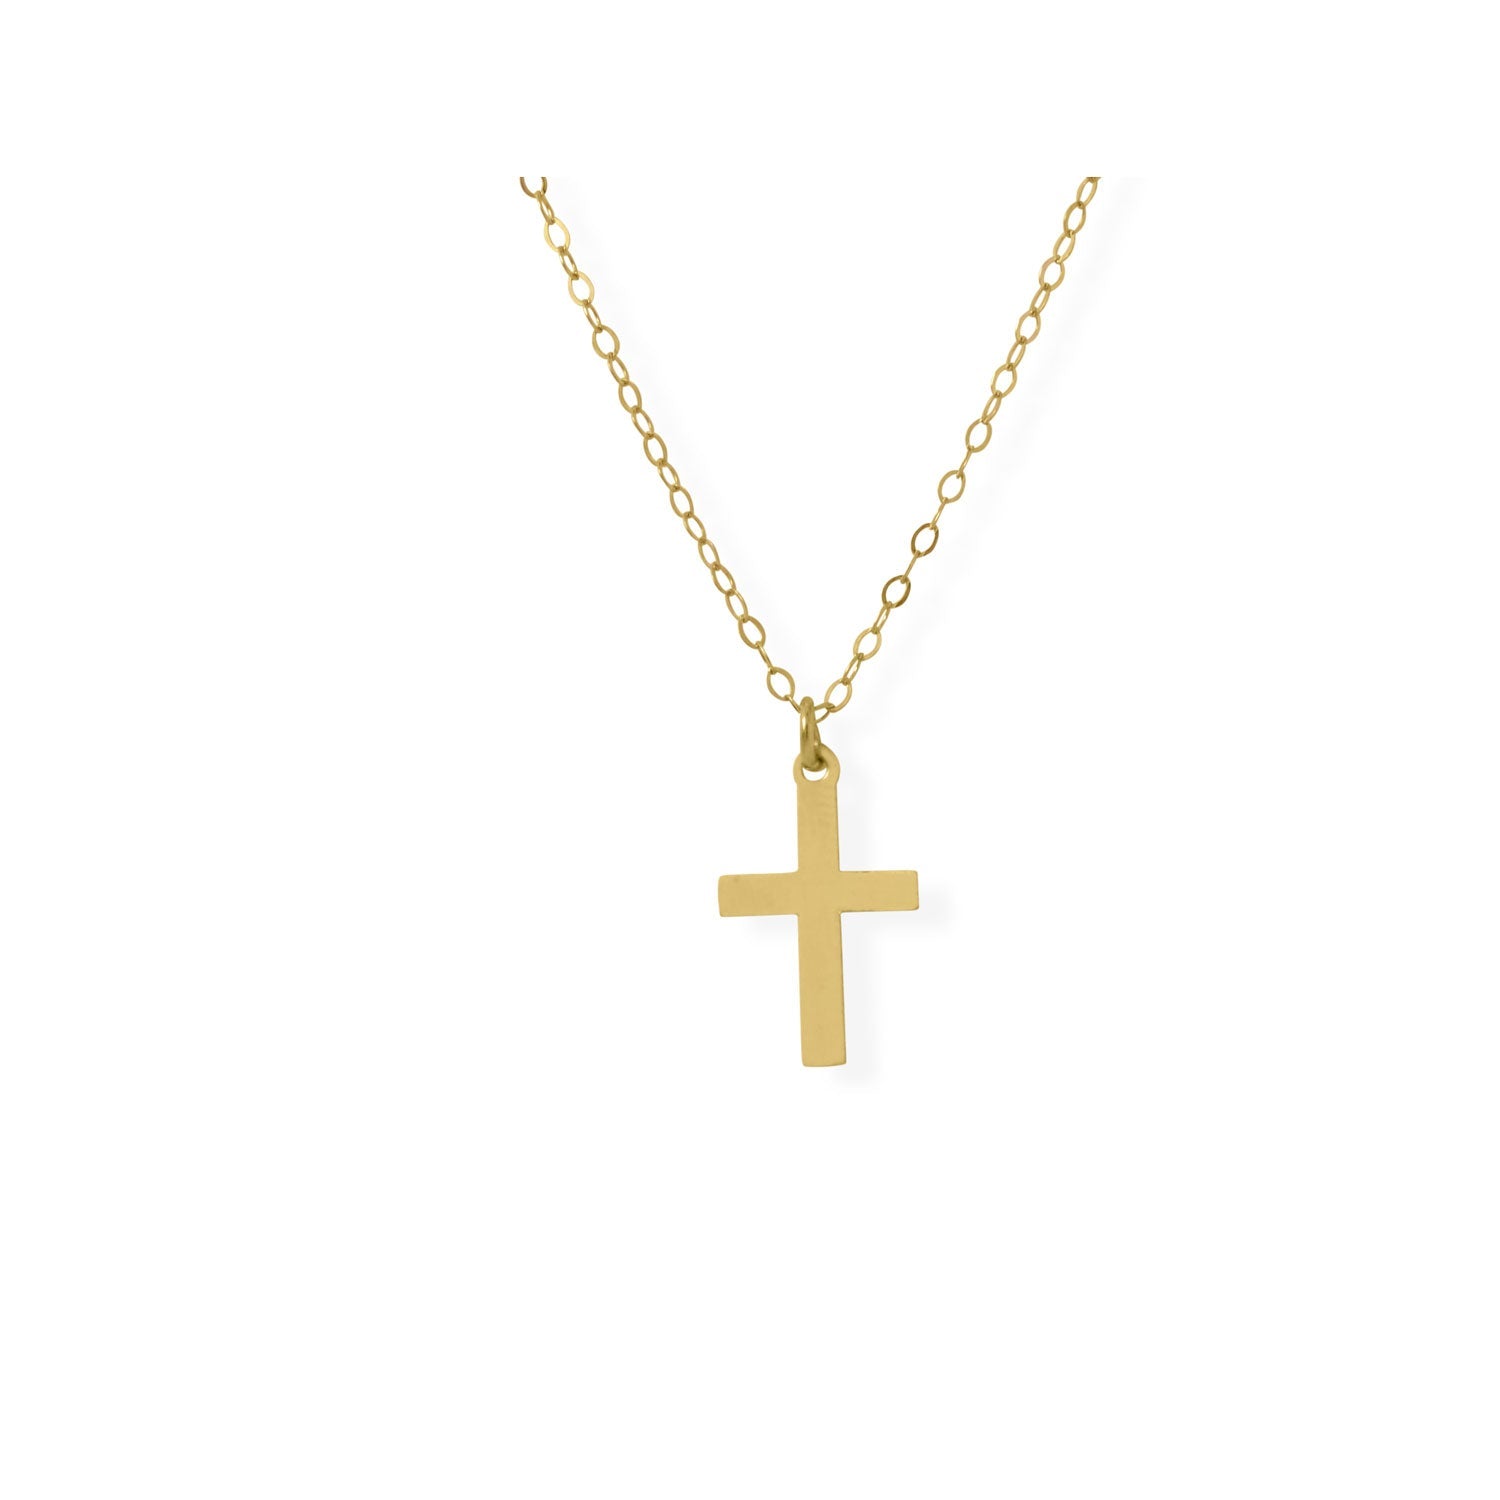 13"+1" Gold-Filled Cross Charm Necklace